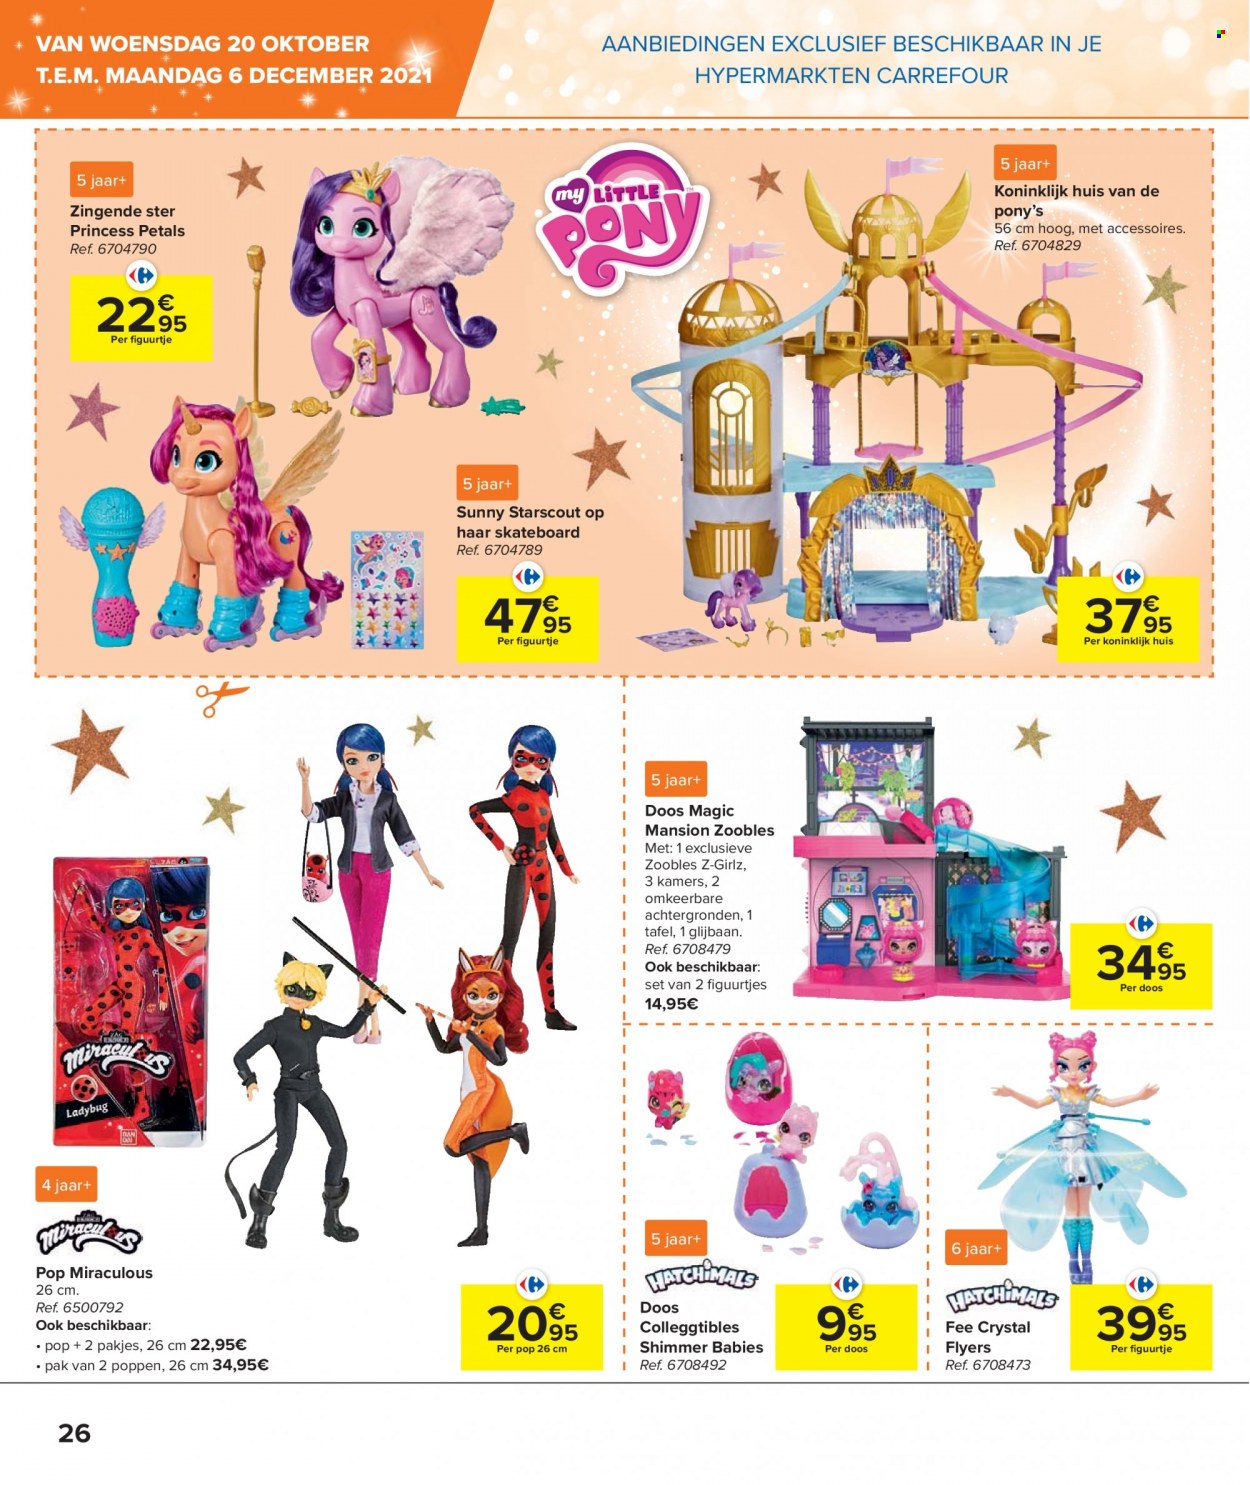 Catalogue Carrefour hypermarkt - 20.10.2021 - 6.12.2021. Page 26.